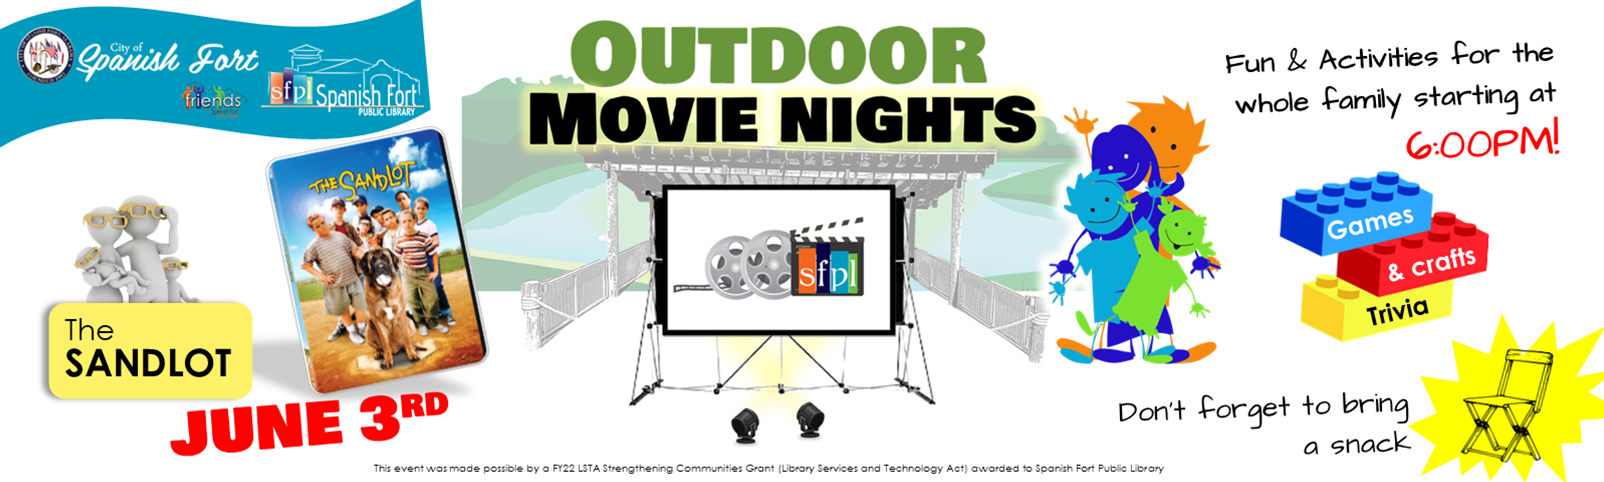 The Spanish Fort community is invited to an outdoor family movie event Friday June 3rd, 2022 on the lawn behind the Spanish Fort Community Center. This 2022 Outdoor Movie Series is presented by Spanish Fort Public Library and the City of Spanish Fort and is FREE to the Spanish Fort community through the 2022 LSTA Strengthening Communities Grant (Library Services and Technology Act) awarded to SFPL.